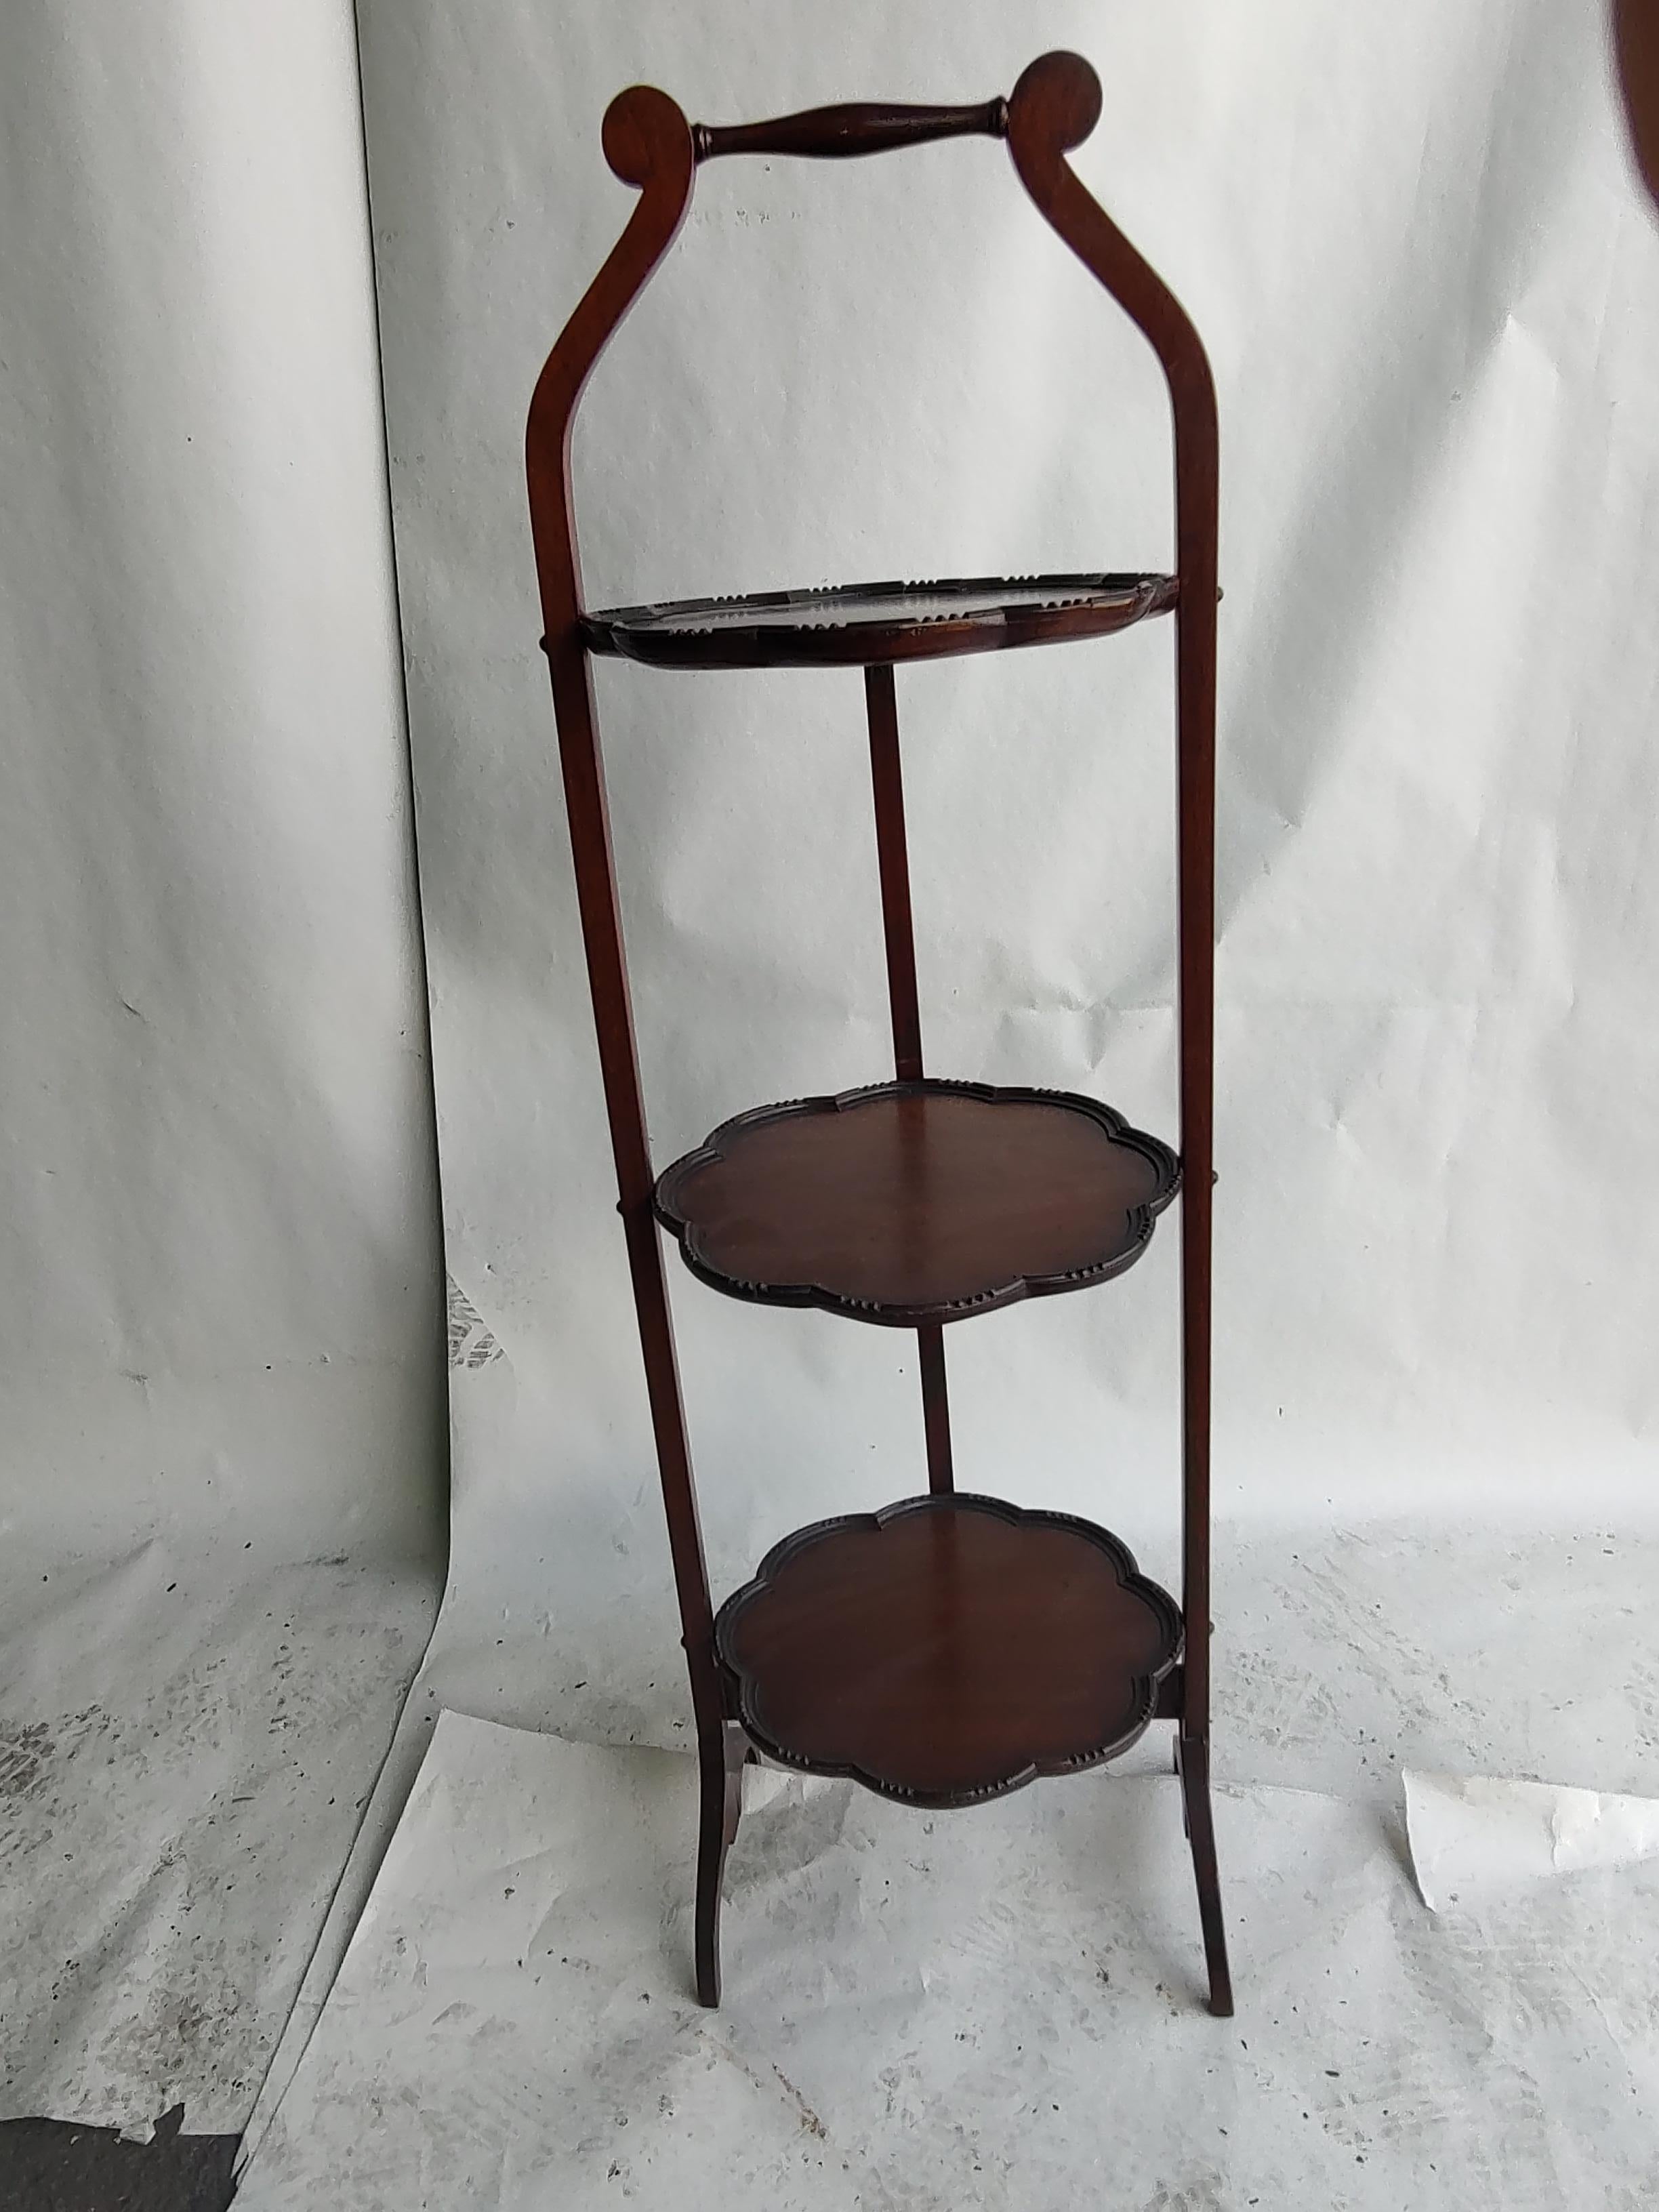 Simple and elegant mahogany folding pie & or cake rack from the United Kingdom. Exceptional candidate for reuse, would work well in the bathroom. Three round mahogany shelf's which conveniently Foldup when not in use. Easy to store and in excellent